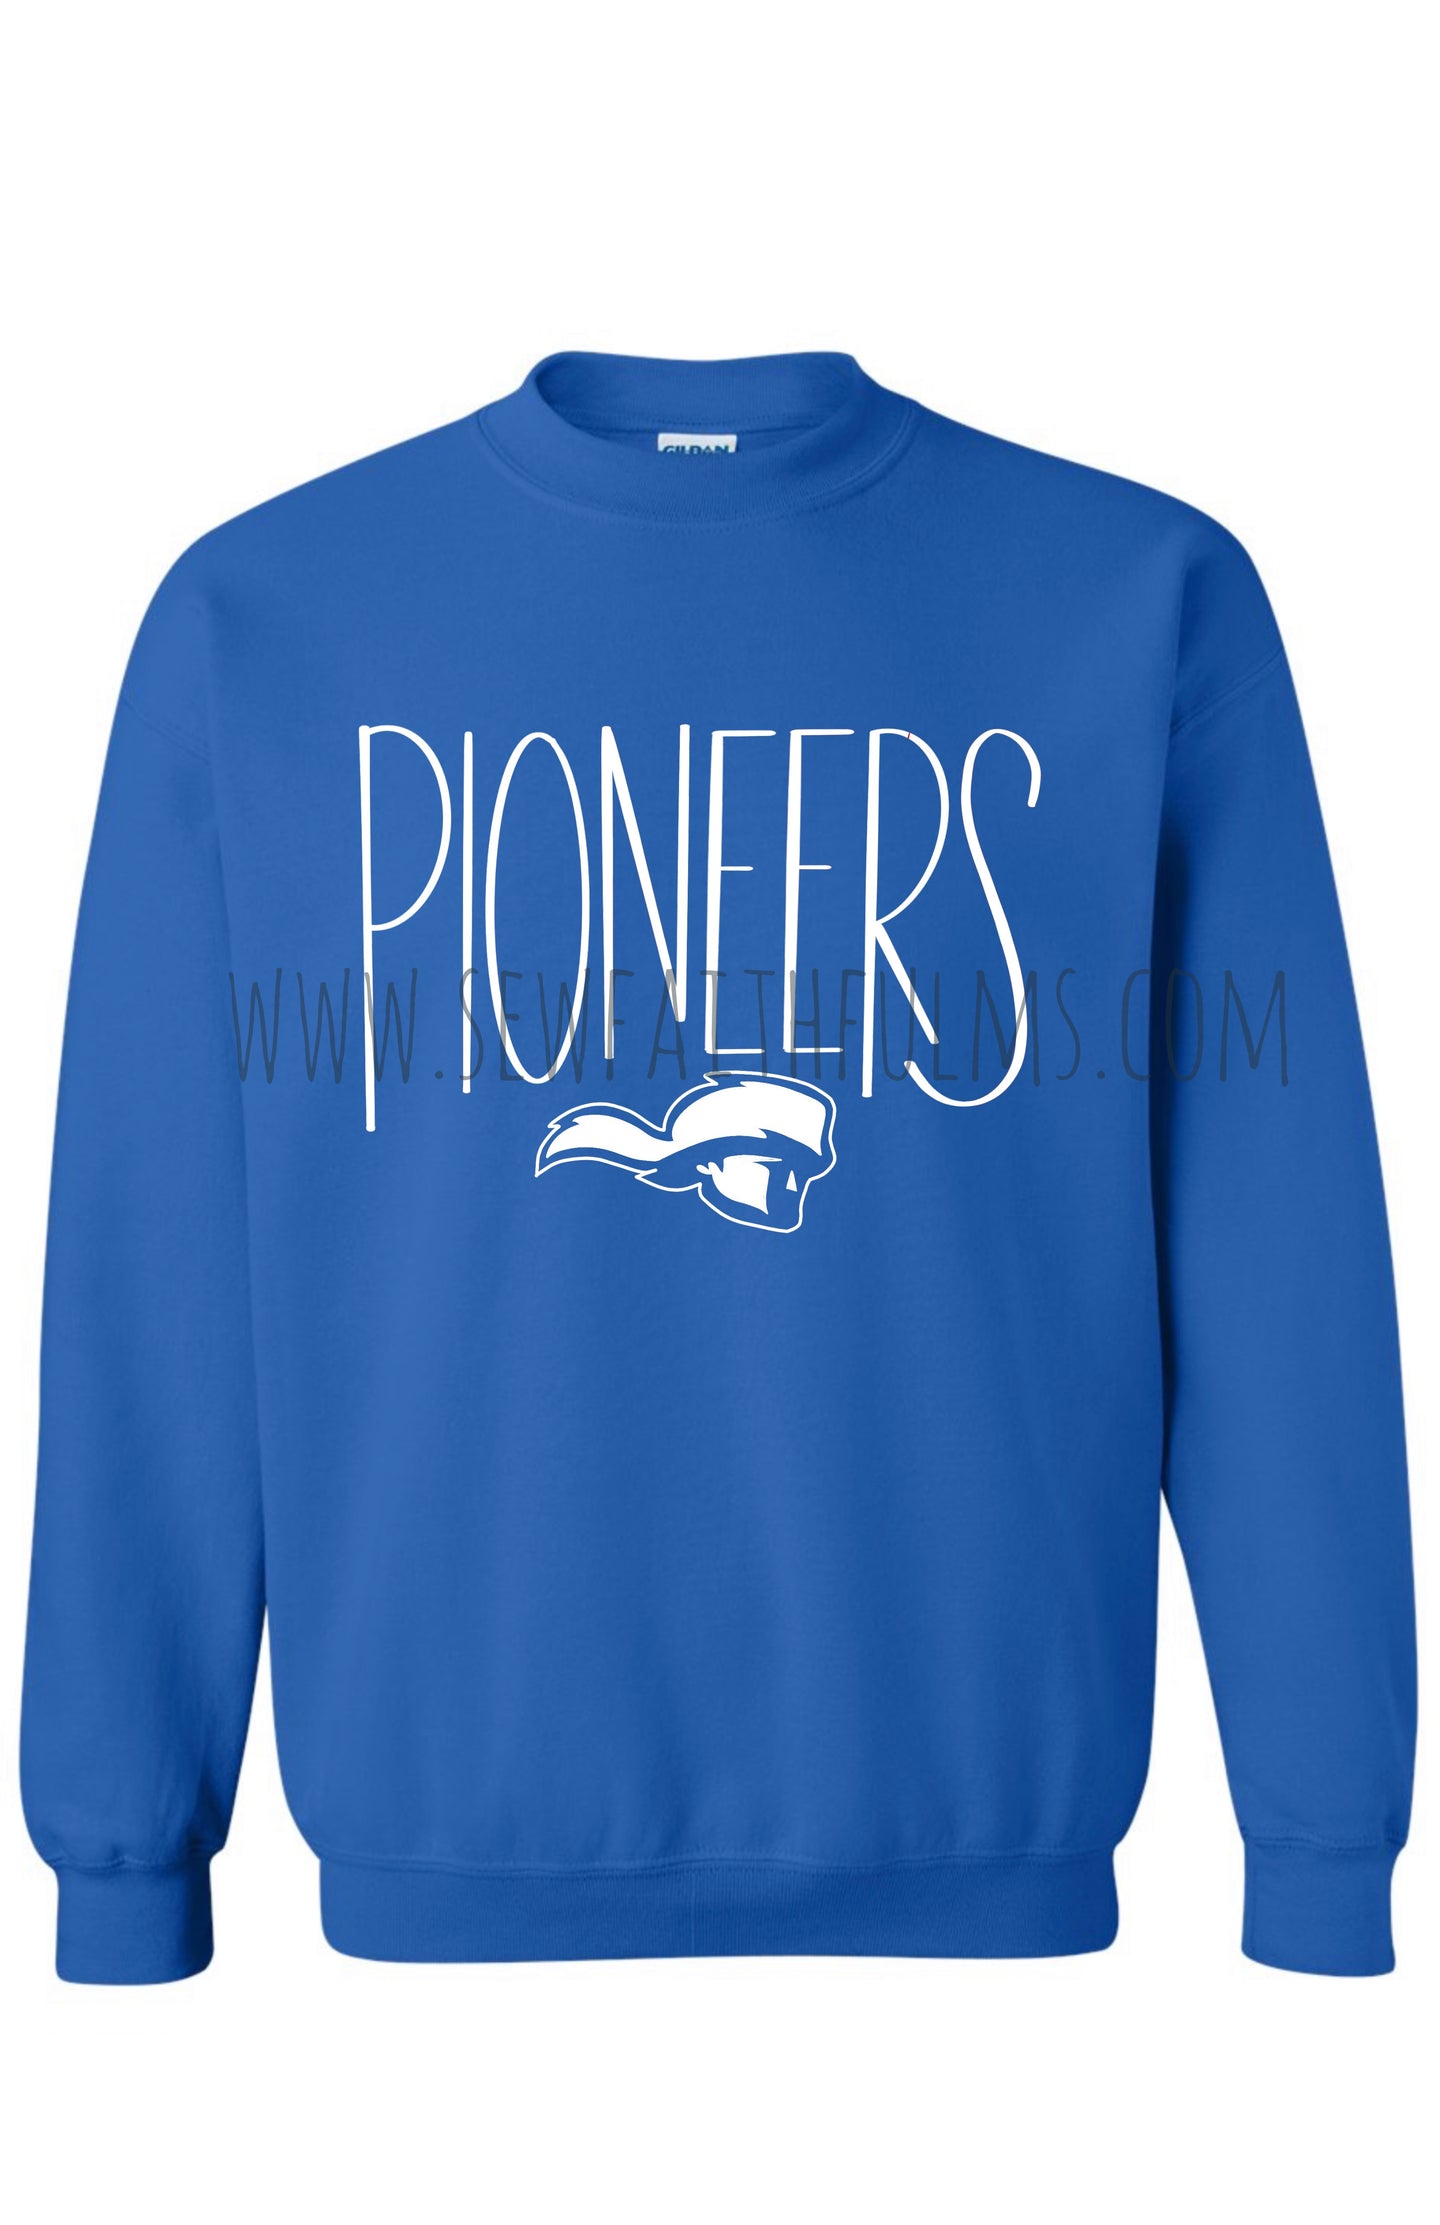 Pioneers Hand Lettered